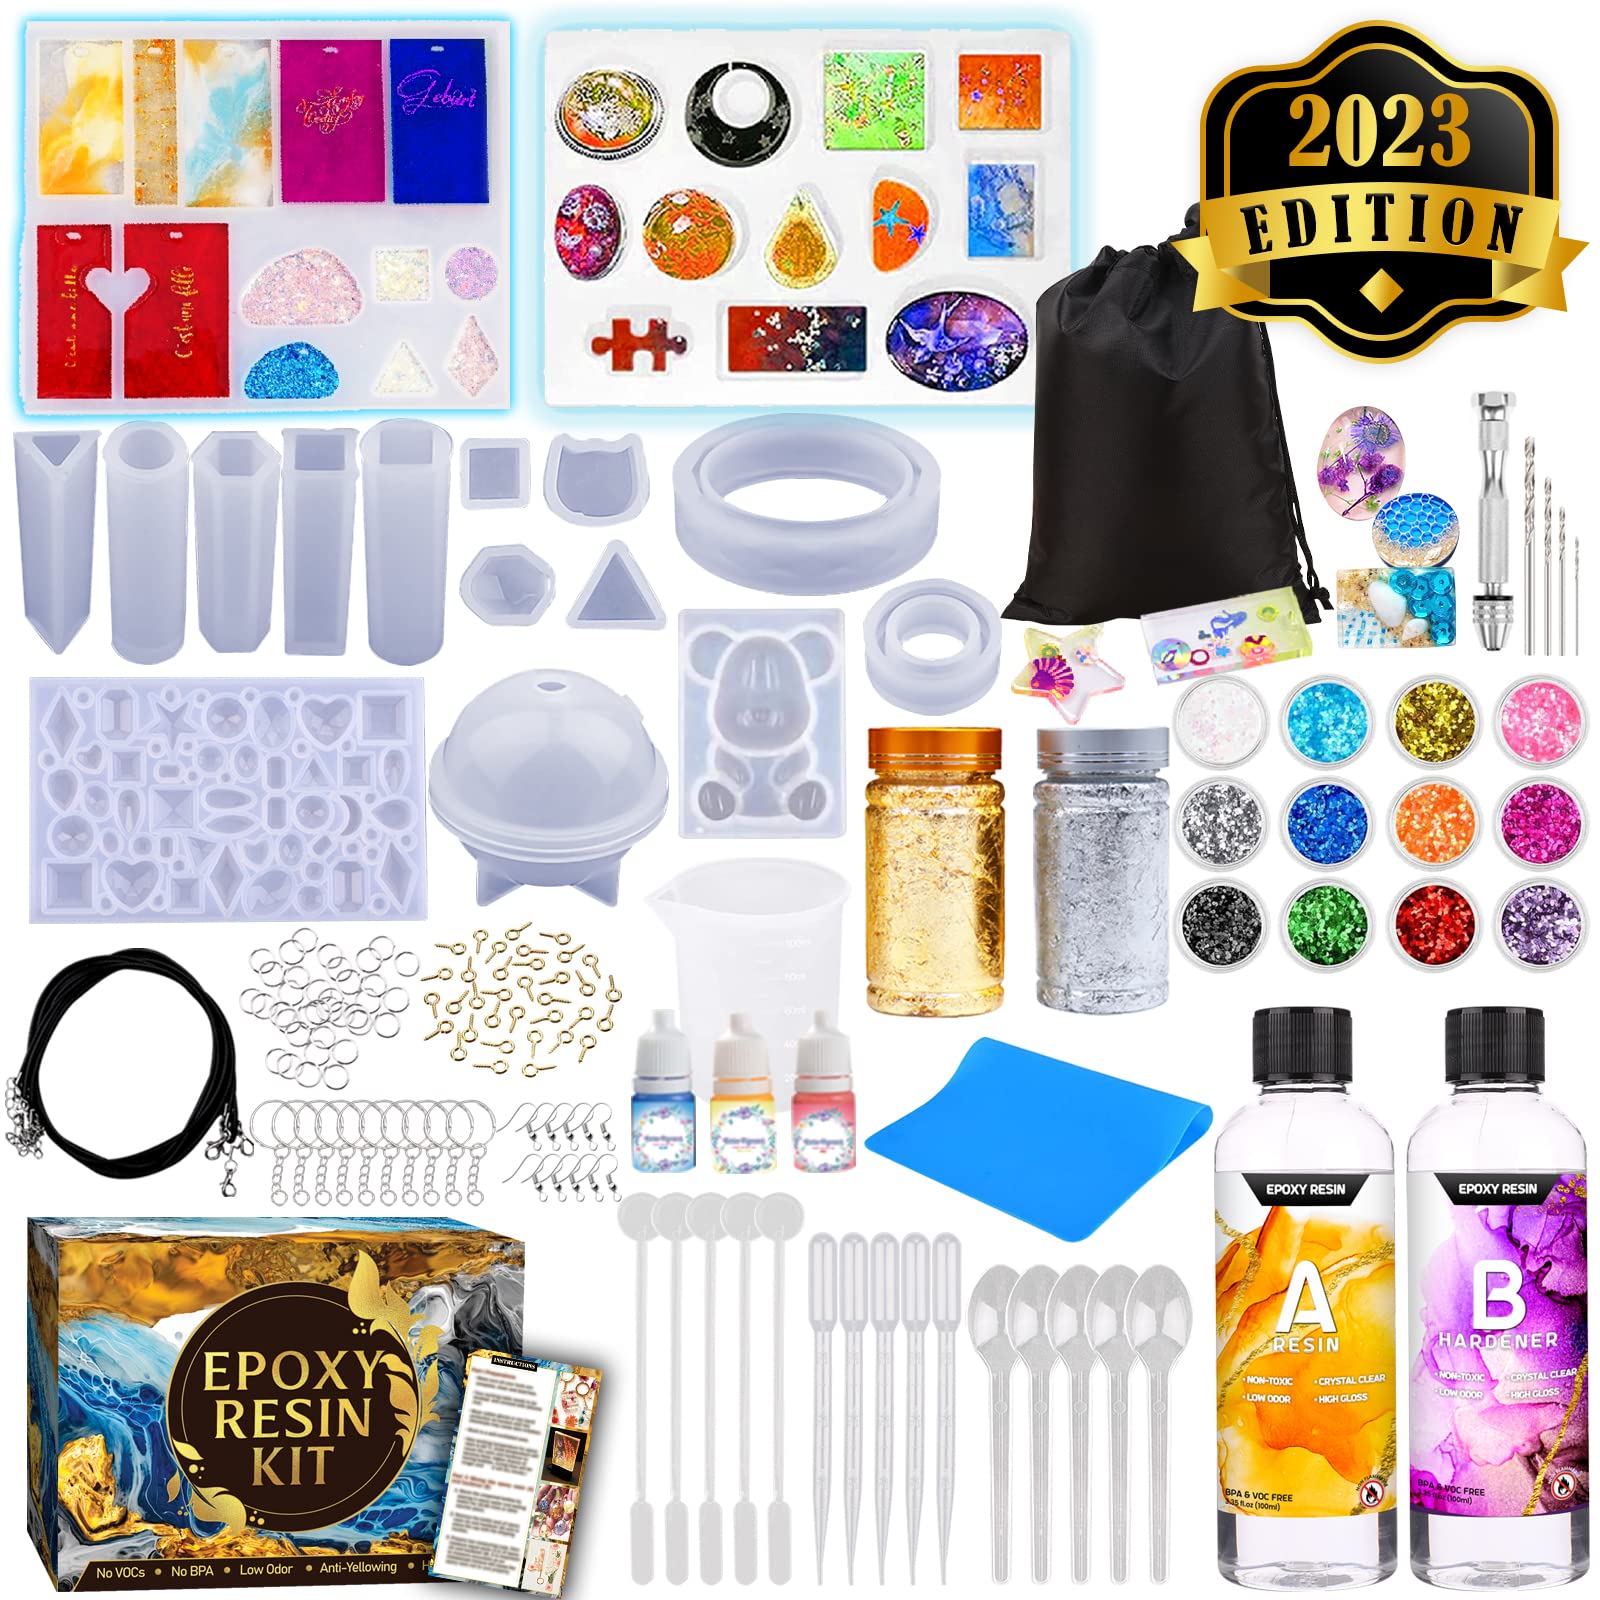 Zoncolor Epoxy Resin Silicone Molds Starter Kit - All in One Office Home  Decor Art Clear Craft Jewelry Making Kit with Storage Bag Plastic Spoons  Gold Foil Flakes Keychain Necklace Supplies Beginners